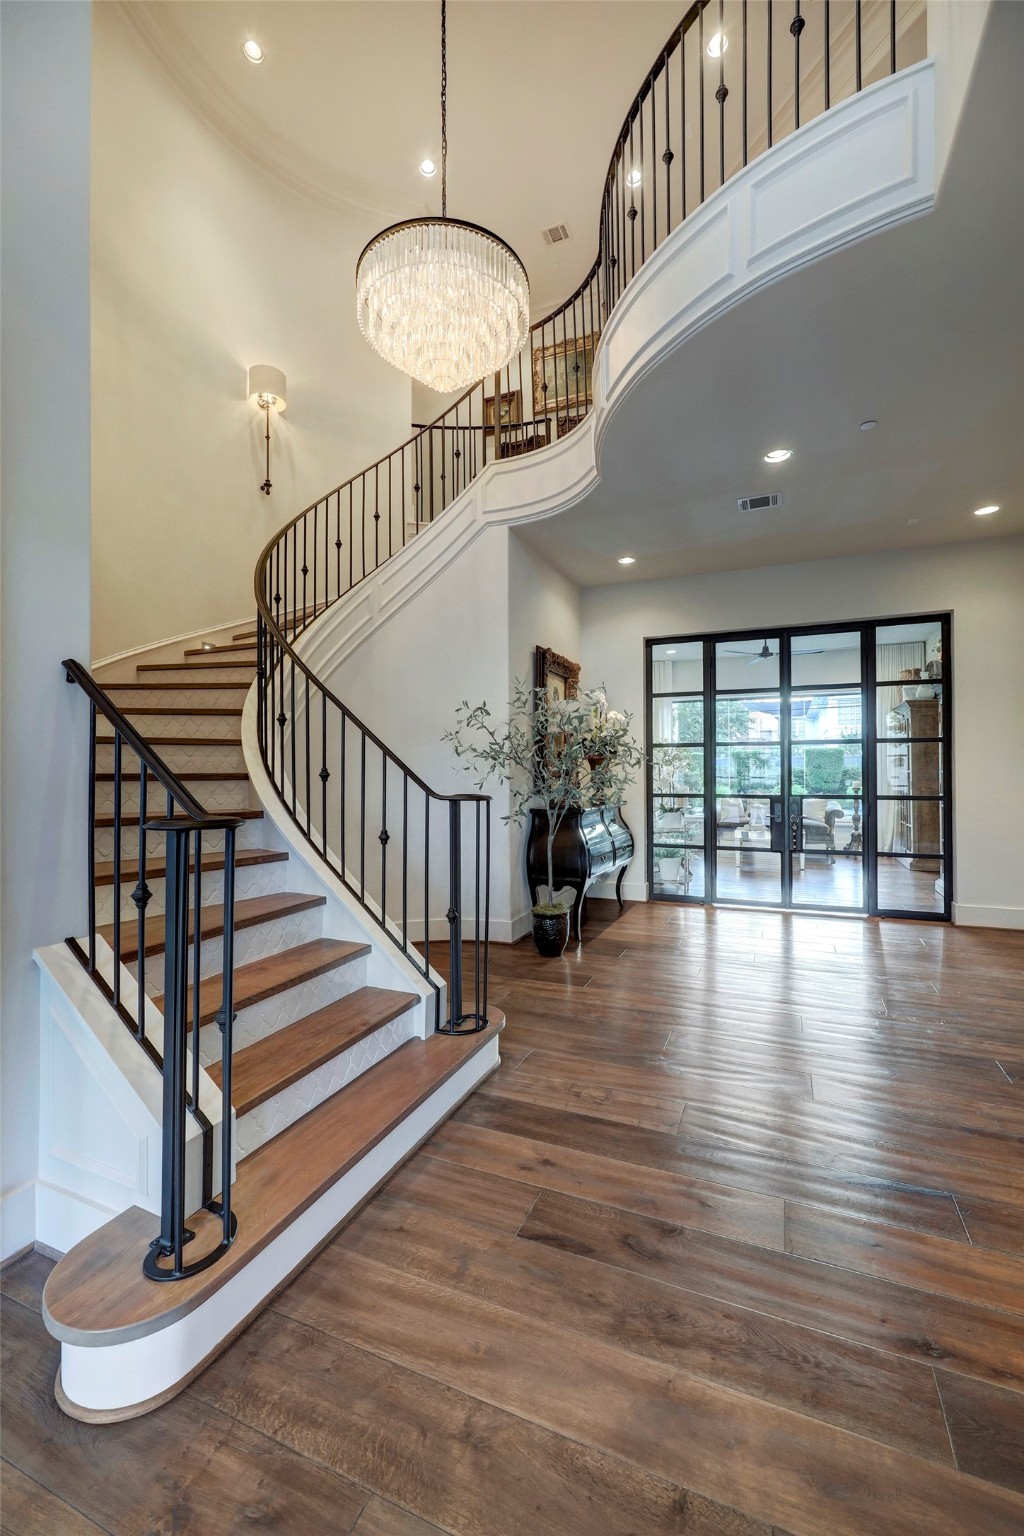 When you walk into the home, you are greeted with a large foyer with a wrought iron spiral staircase to lead you upstairs. Past the stairs leads you to the steel framed doors of your primary suite.